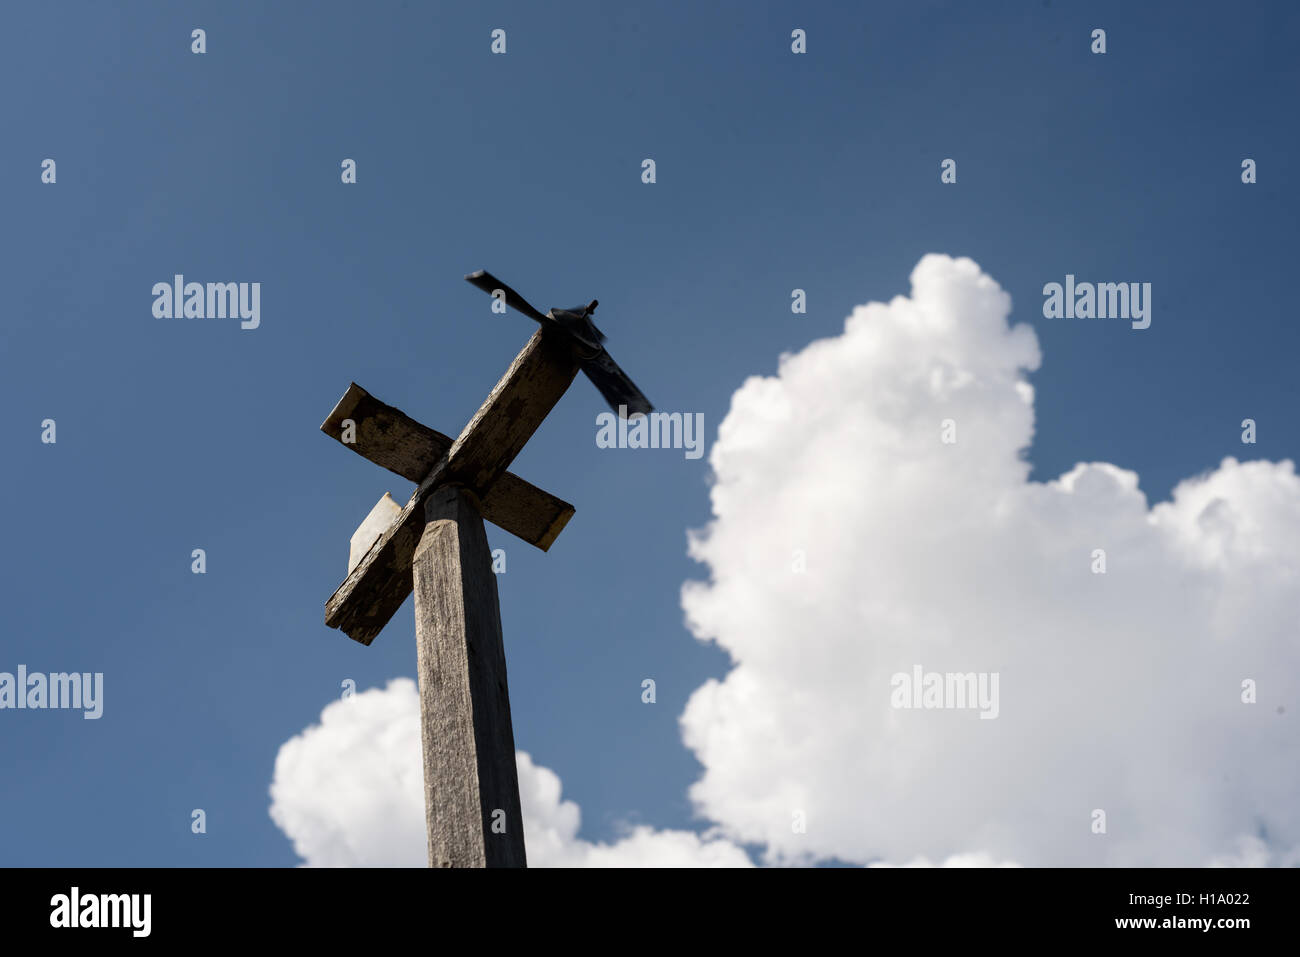 Single wooden airplane weather vane set against a blue sky with a large white cloud. Stock Photo